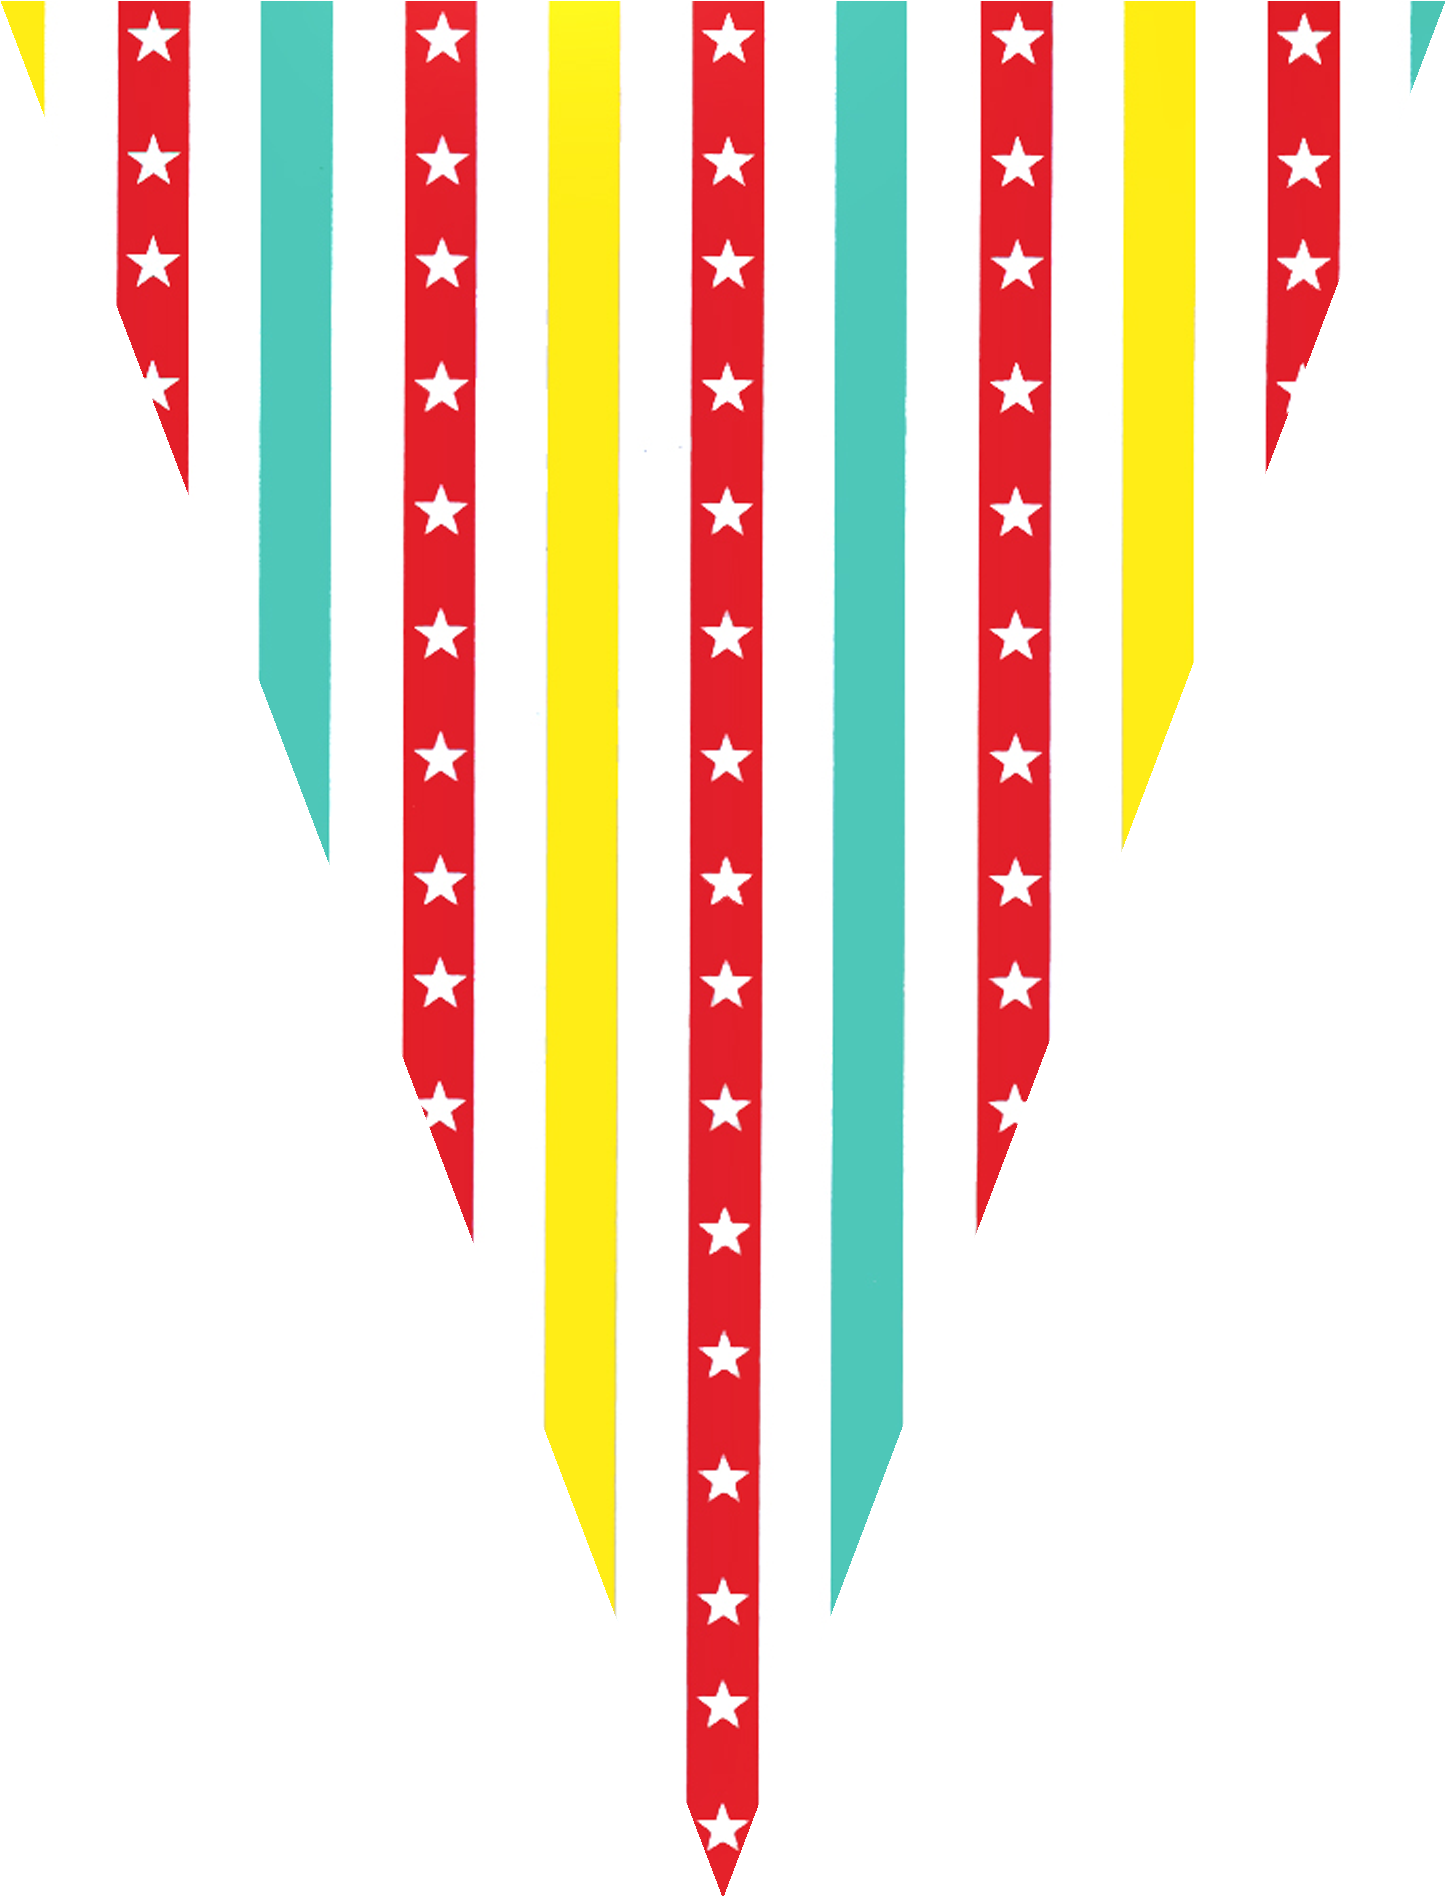 A Colorful Striped Triangle With White Stars And Red And Blue Stripes